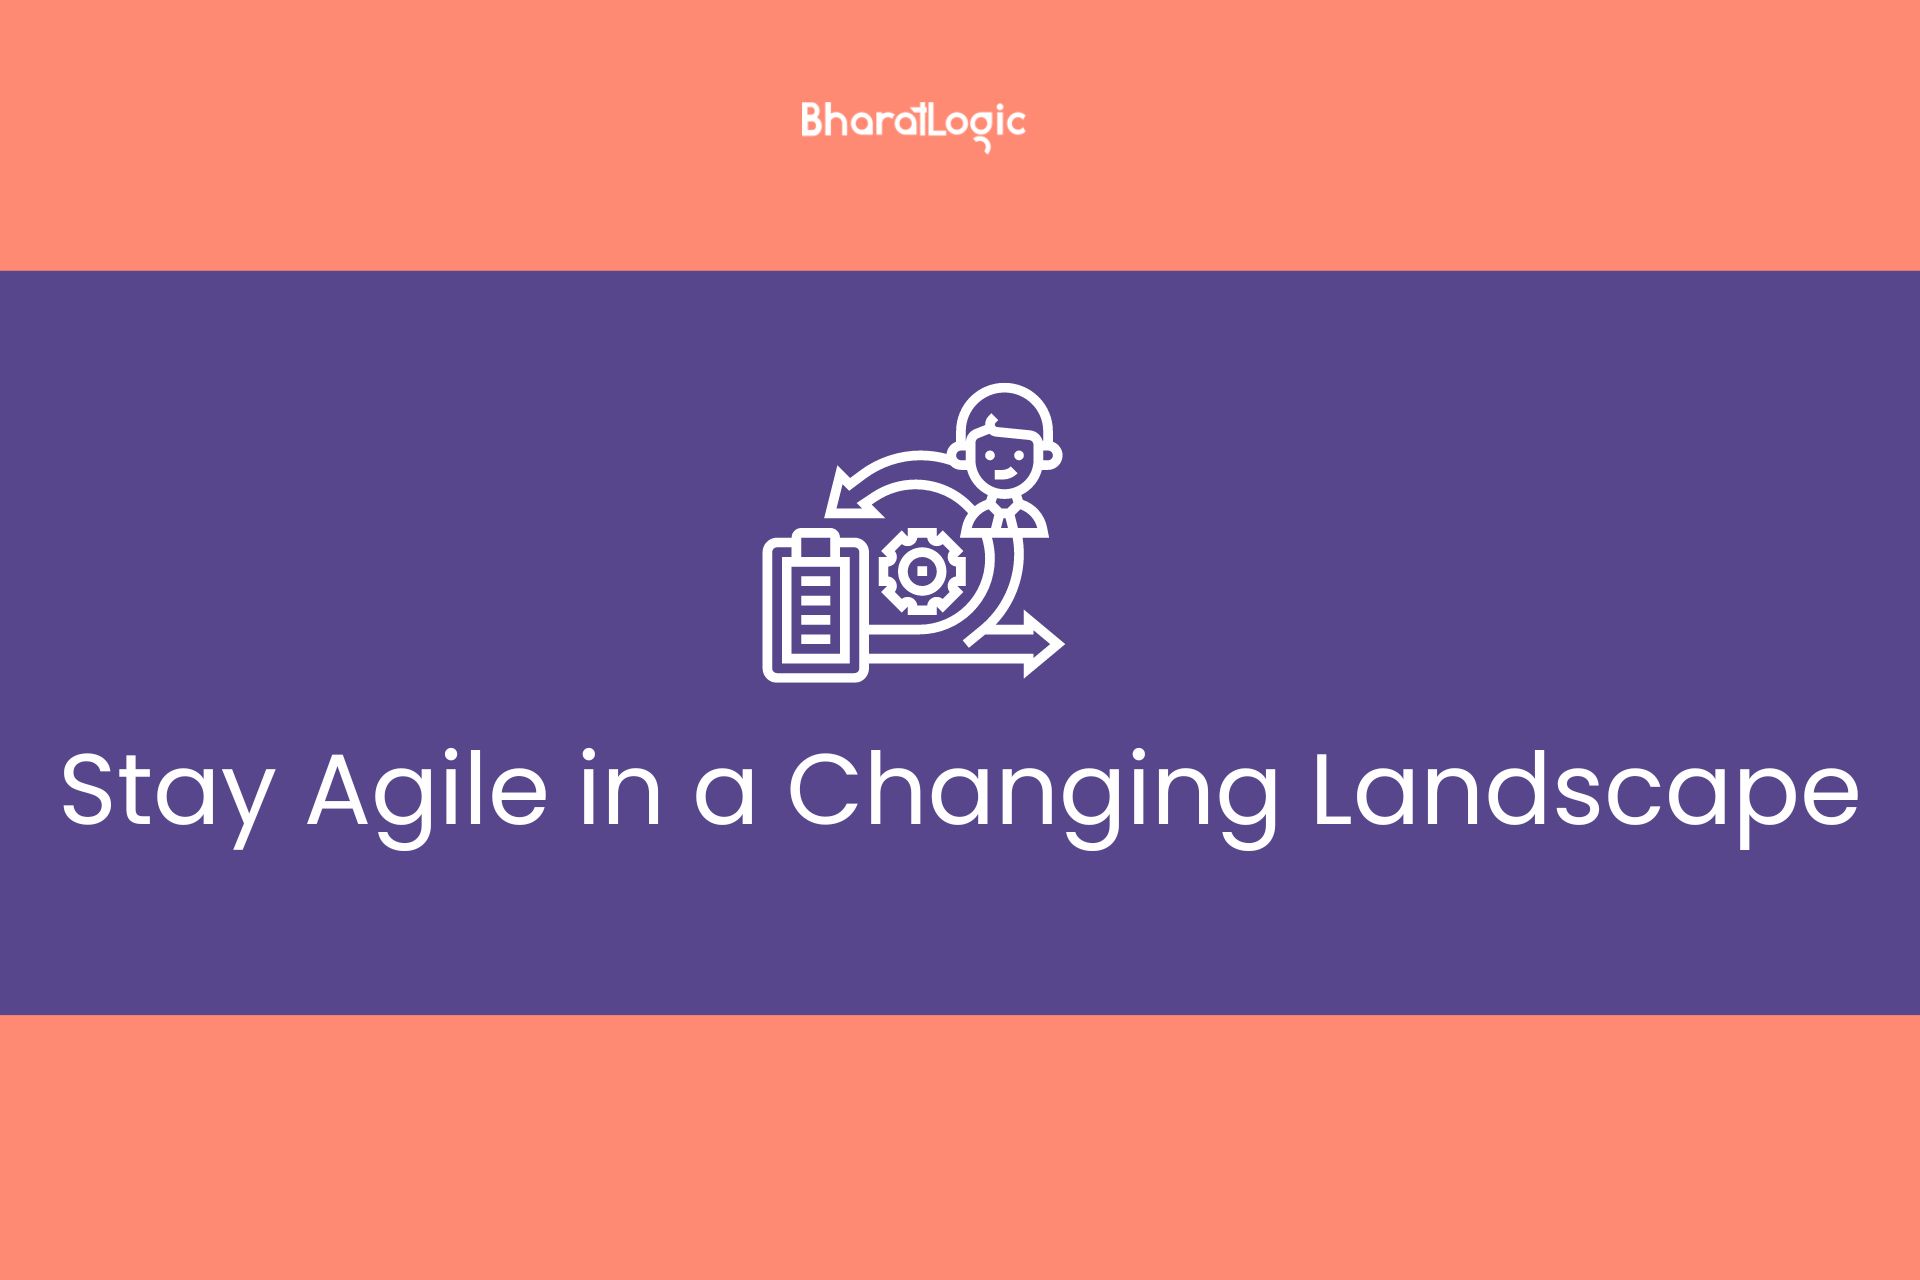 Stay Agile in a Changing Landscape